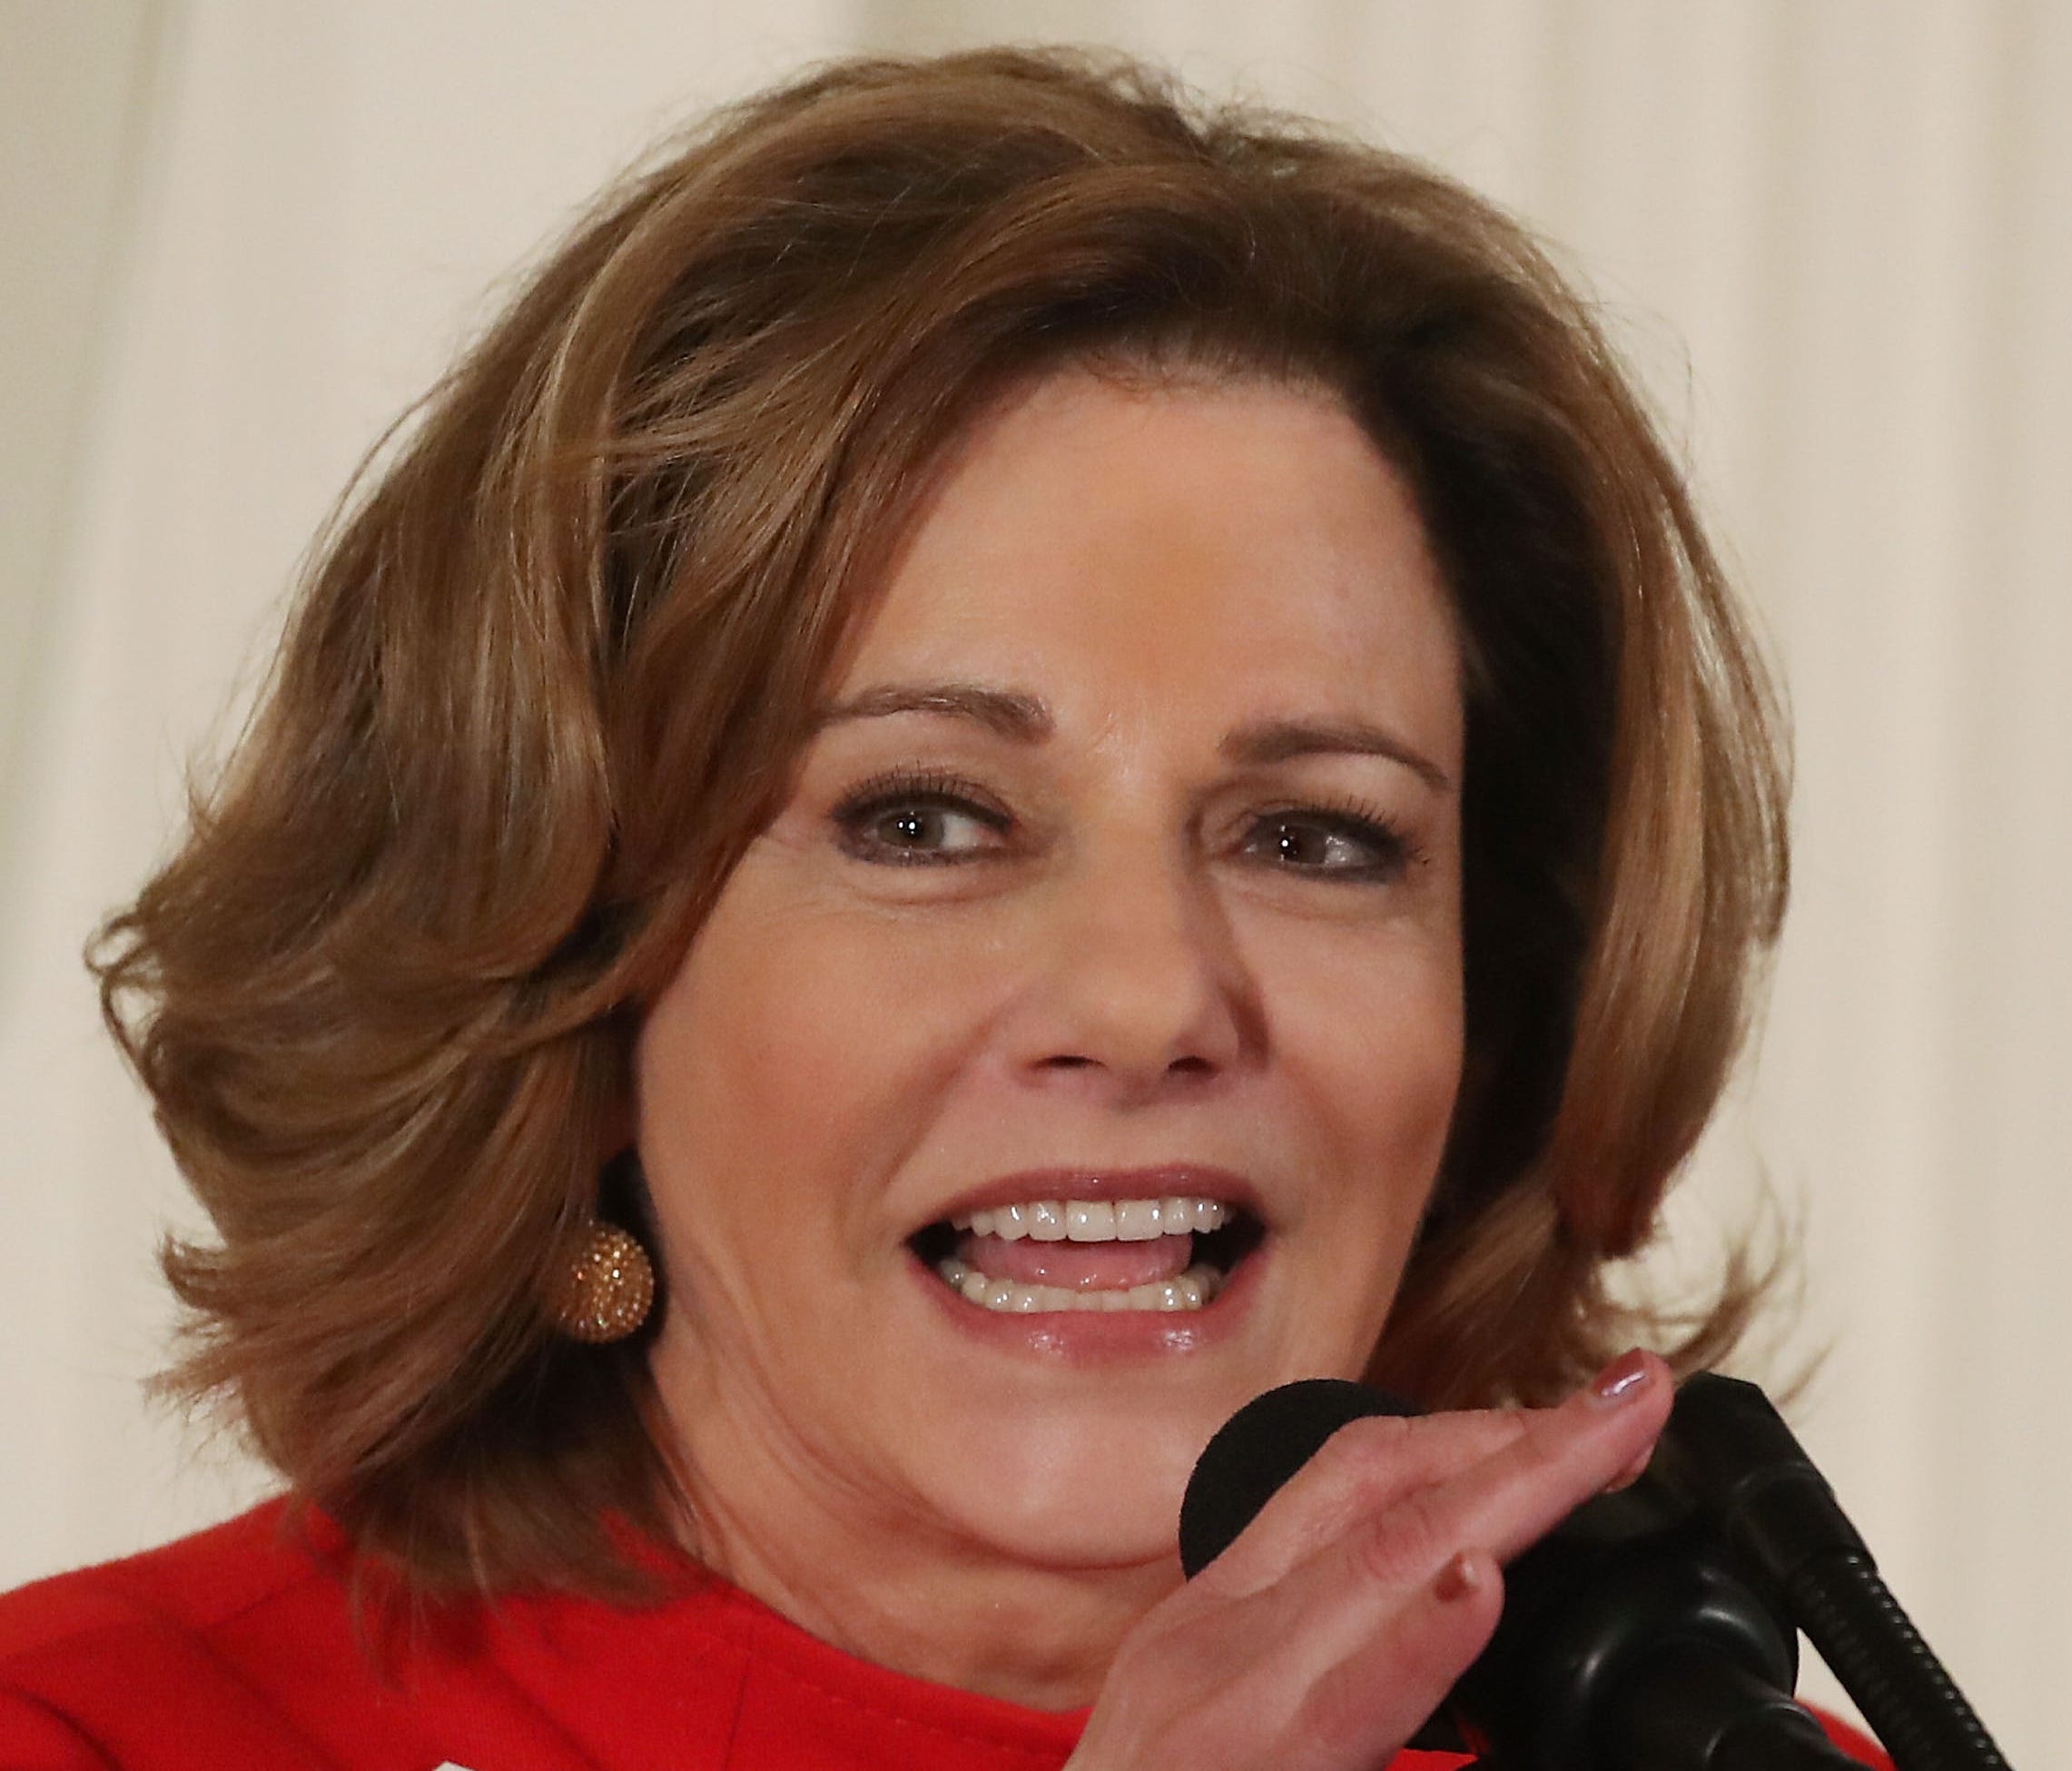 Deputy National Security Advisor, K.T. McFarland speaks during an event celebrating Women's History Month, in the East Room at the White House March 29, 2017 in Washington, DC.